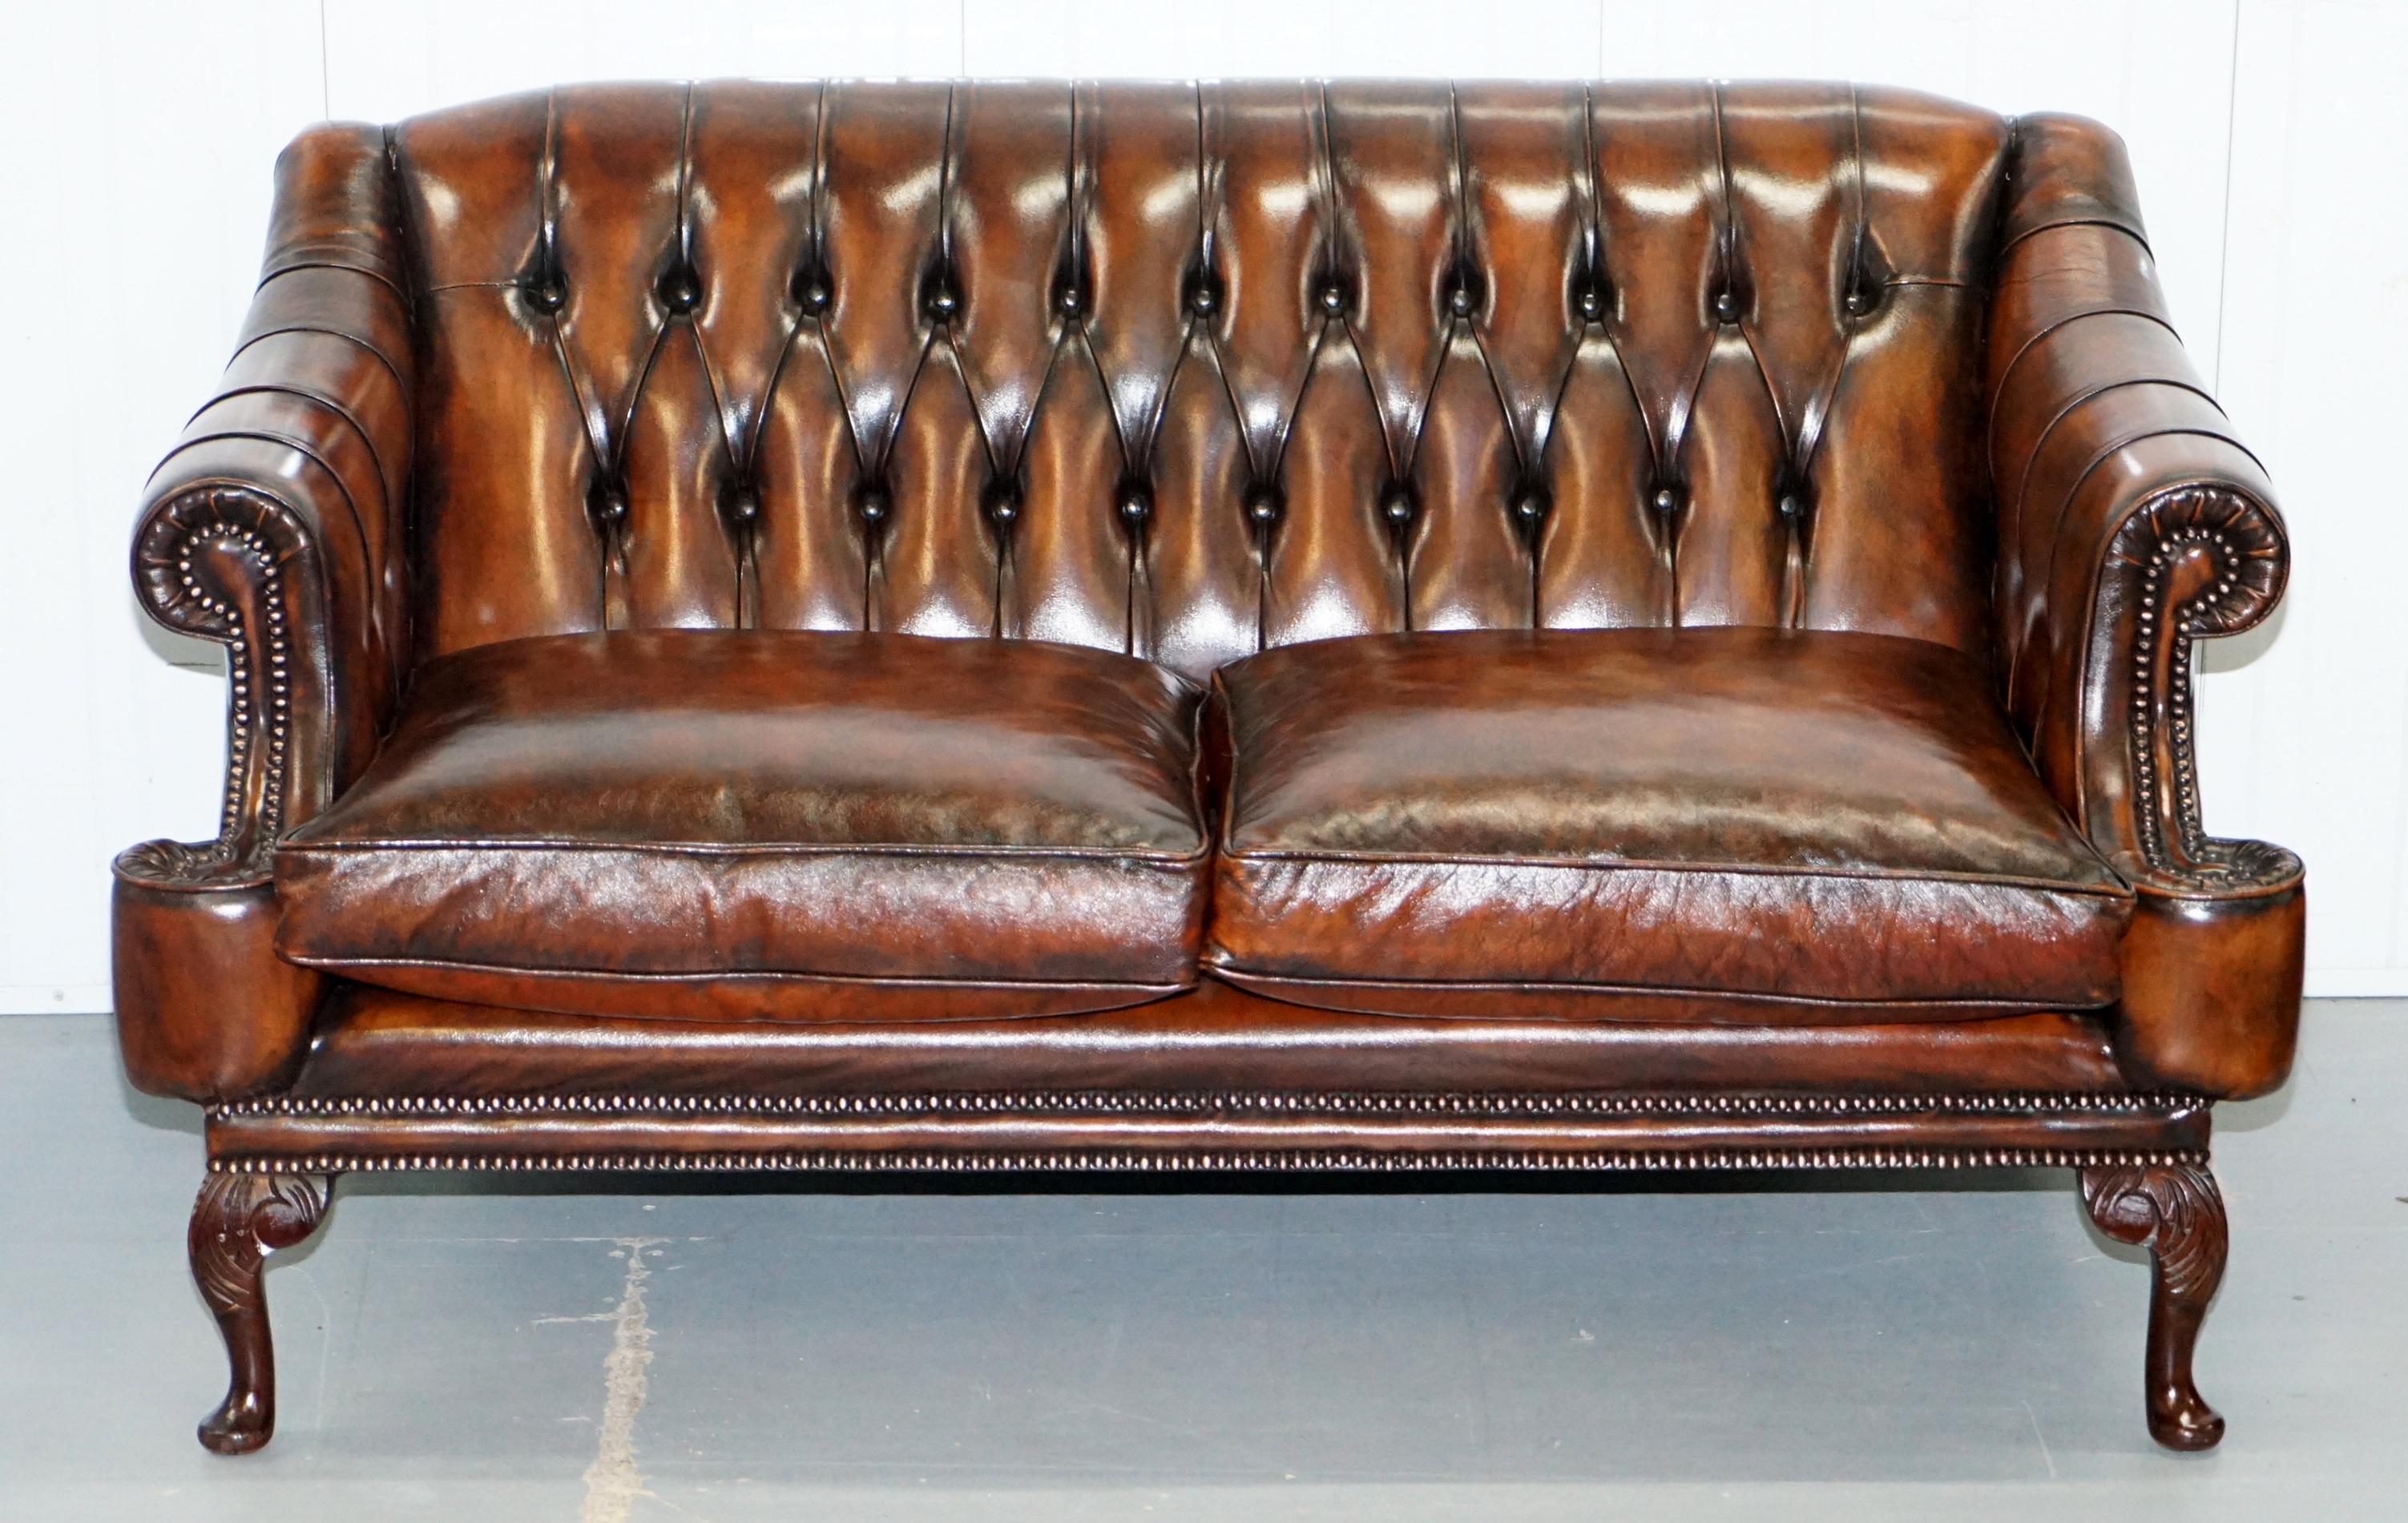 We are delighted to offer for auction this very rare pair of Lutyen’s Viceroy style Chesterfield fully restored hand dyed Whiskey brown leather two seat bench settees 

A very rare model settee, originally made by Lutyen’s in the latter part of